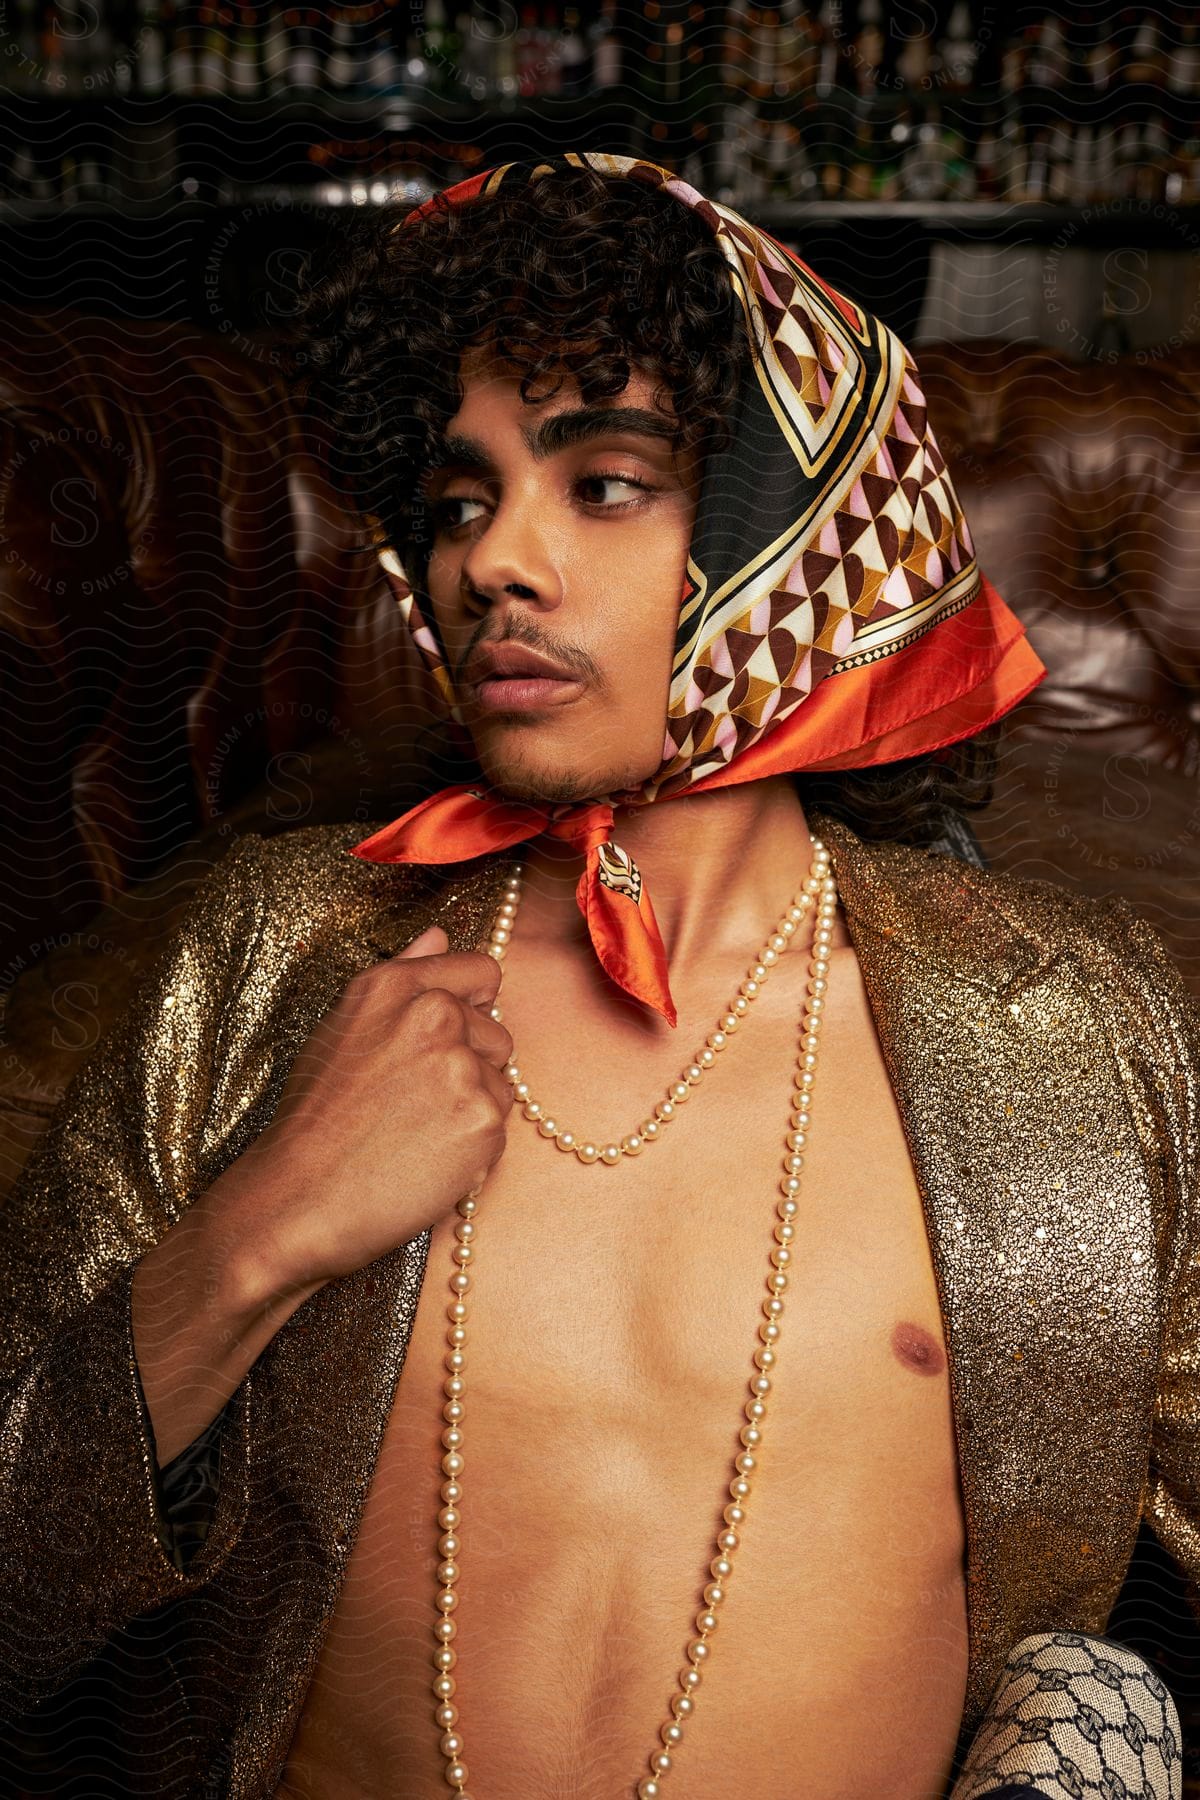 Man wearing a head scarf and an open gold jacket with a bare chest as he holds the pearls around his neck and looks to his side